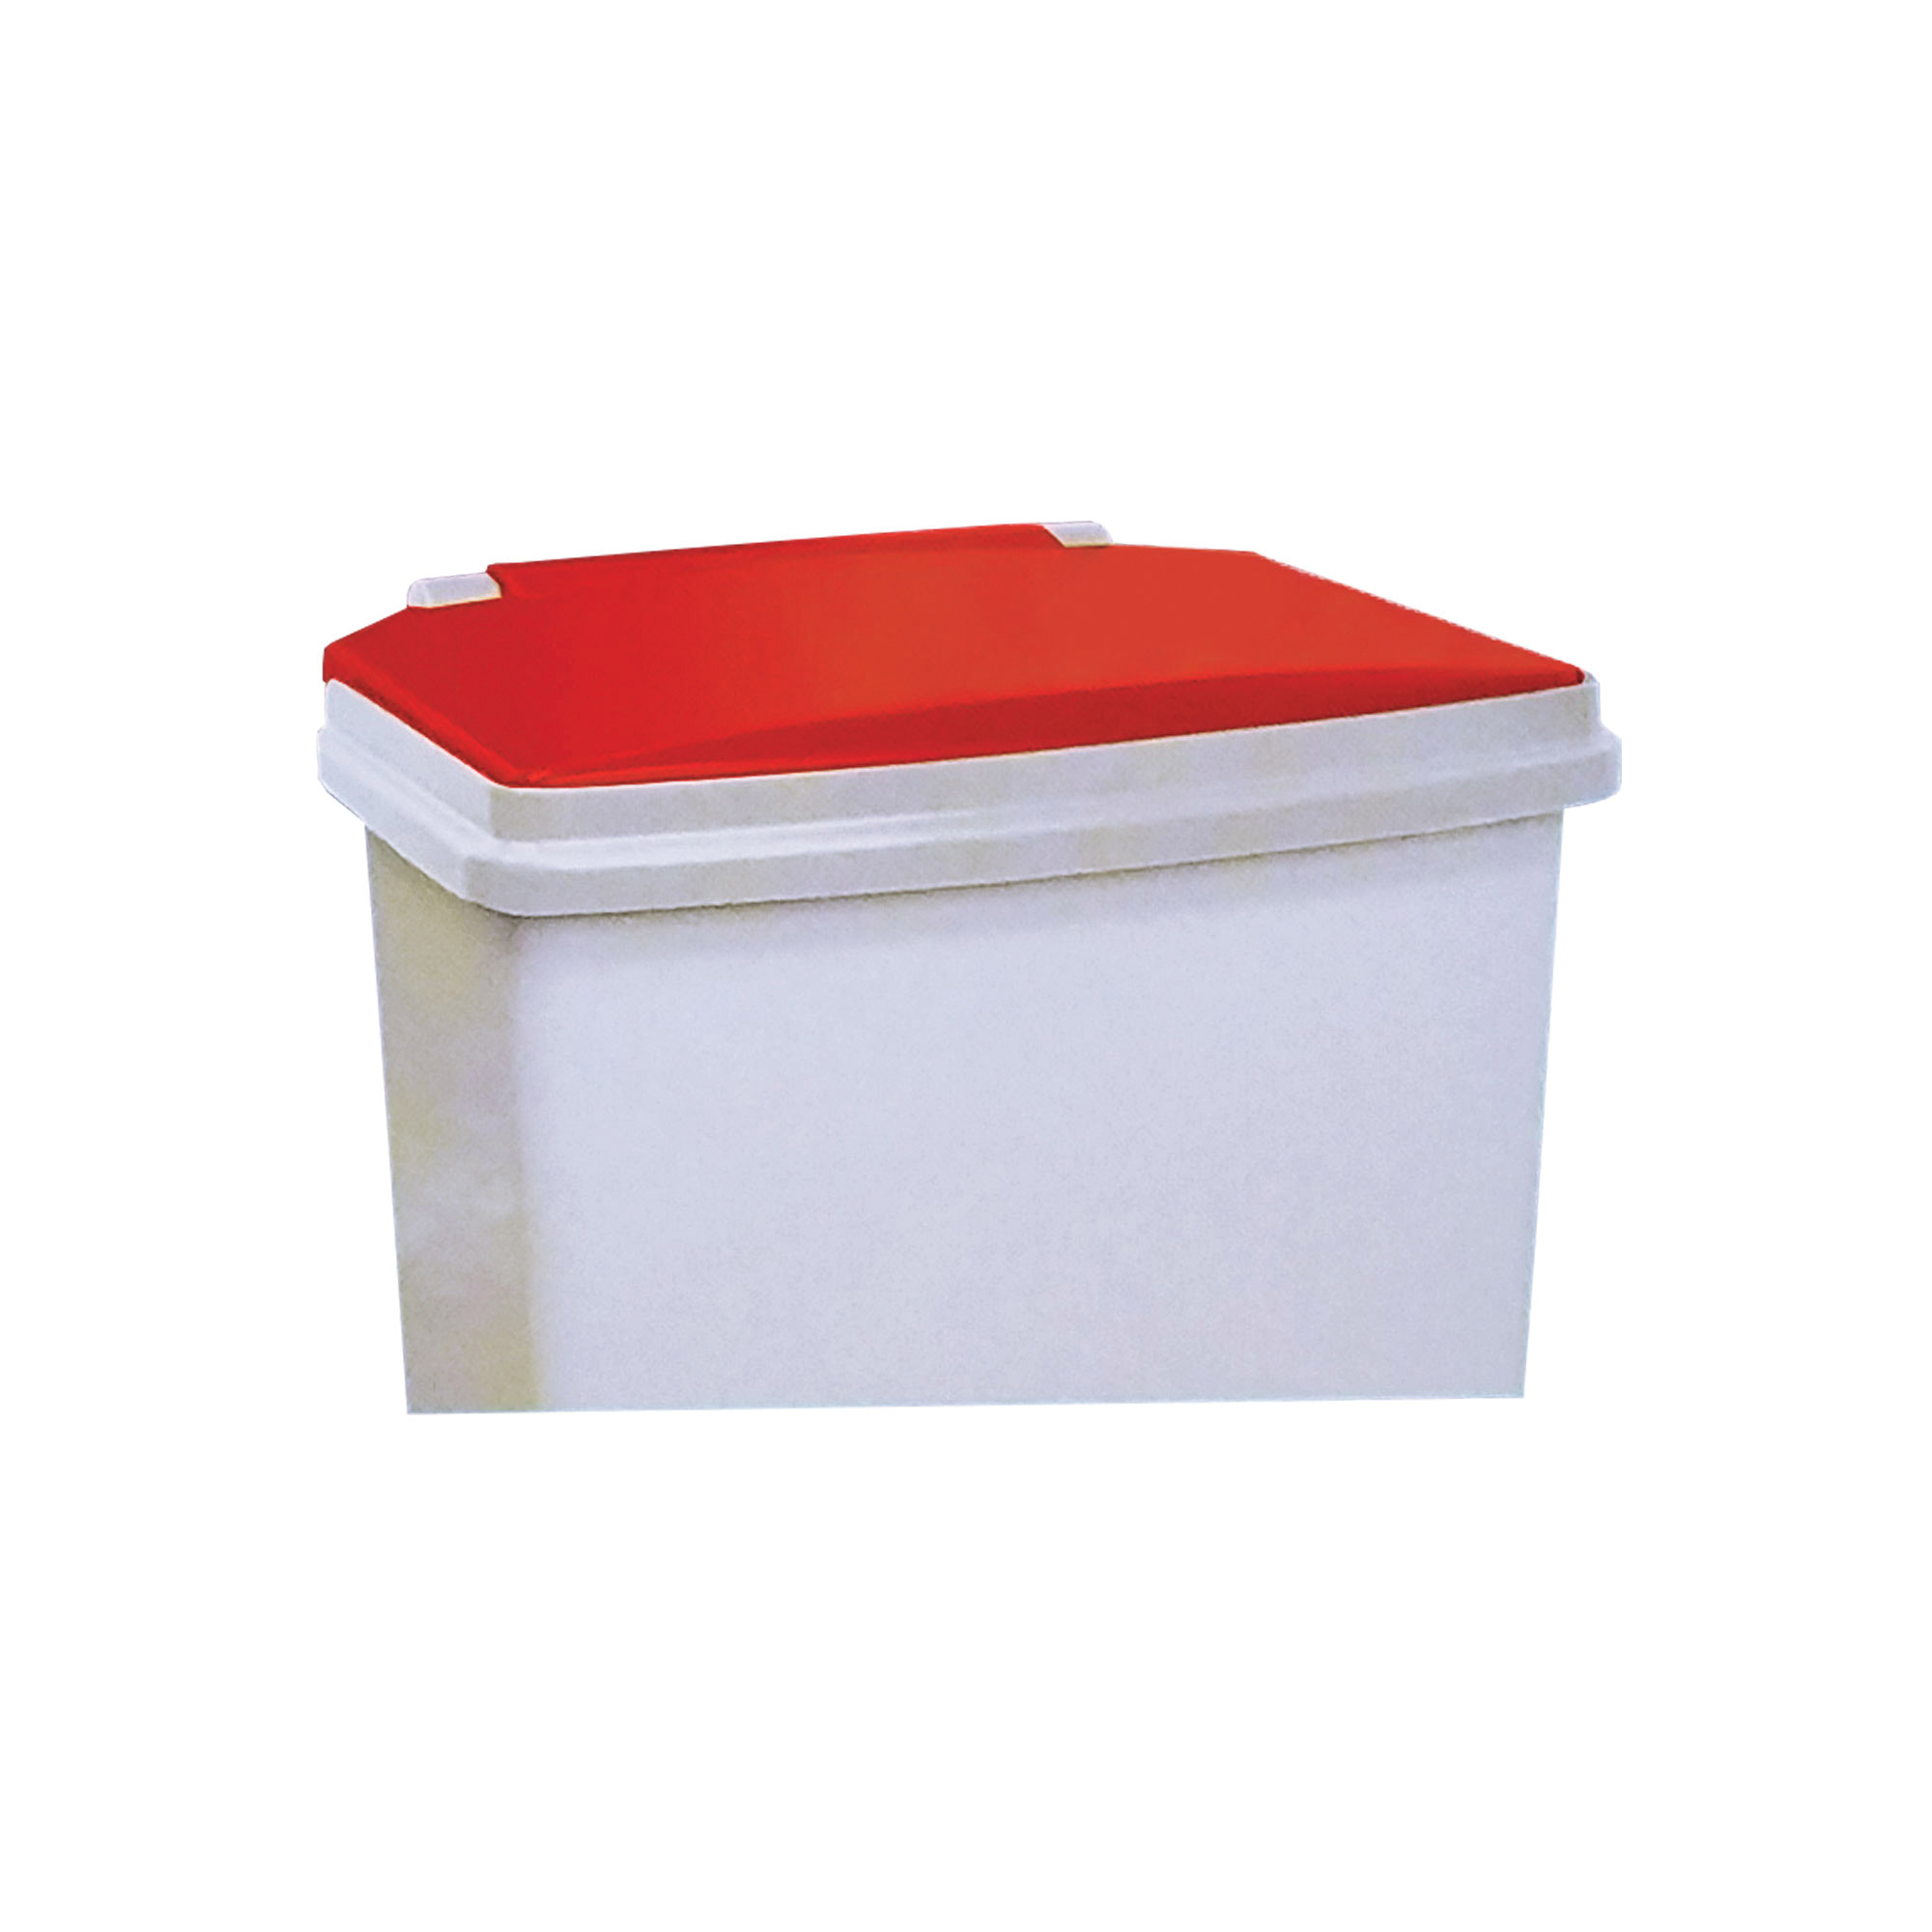 Red Replacement Lid For EB-3295